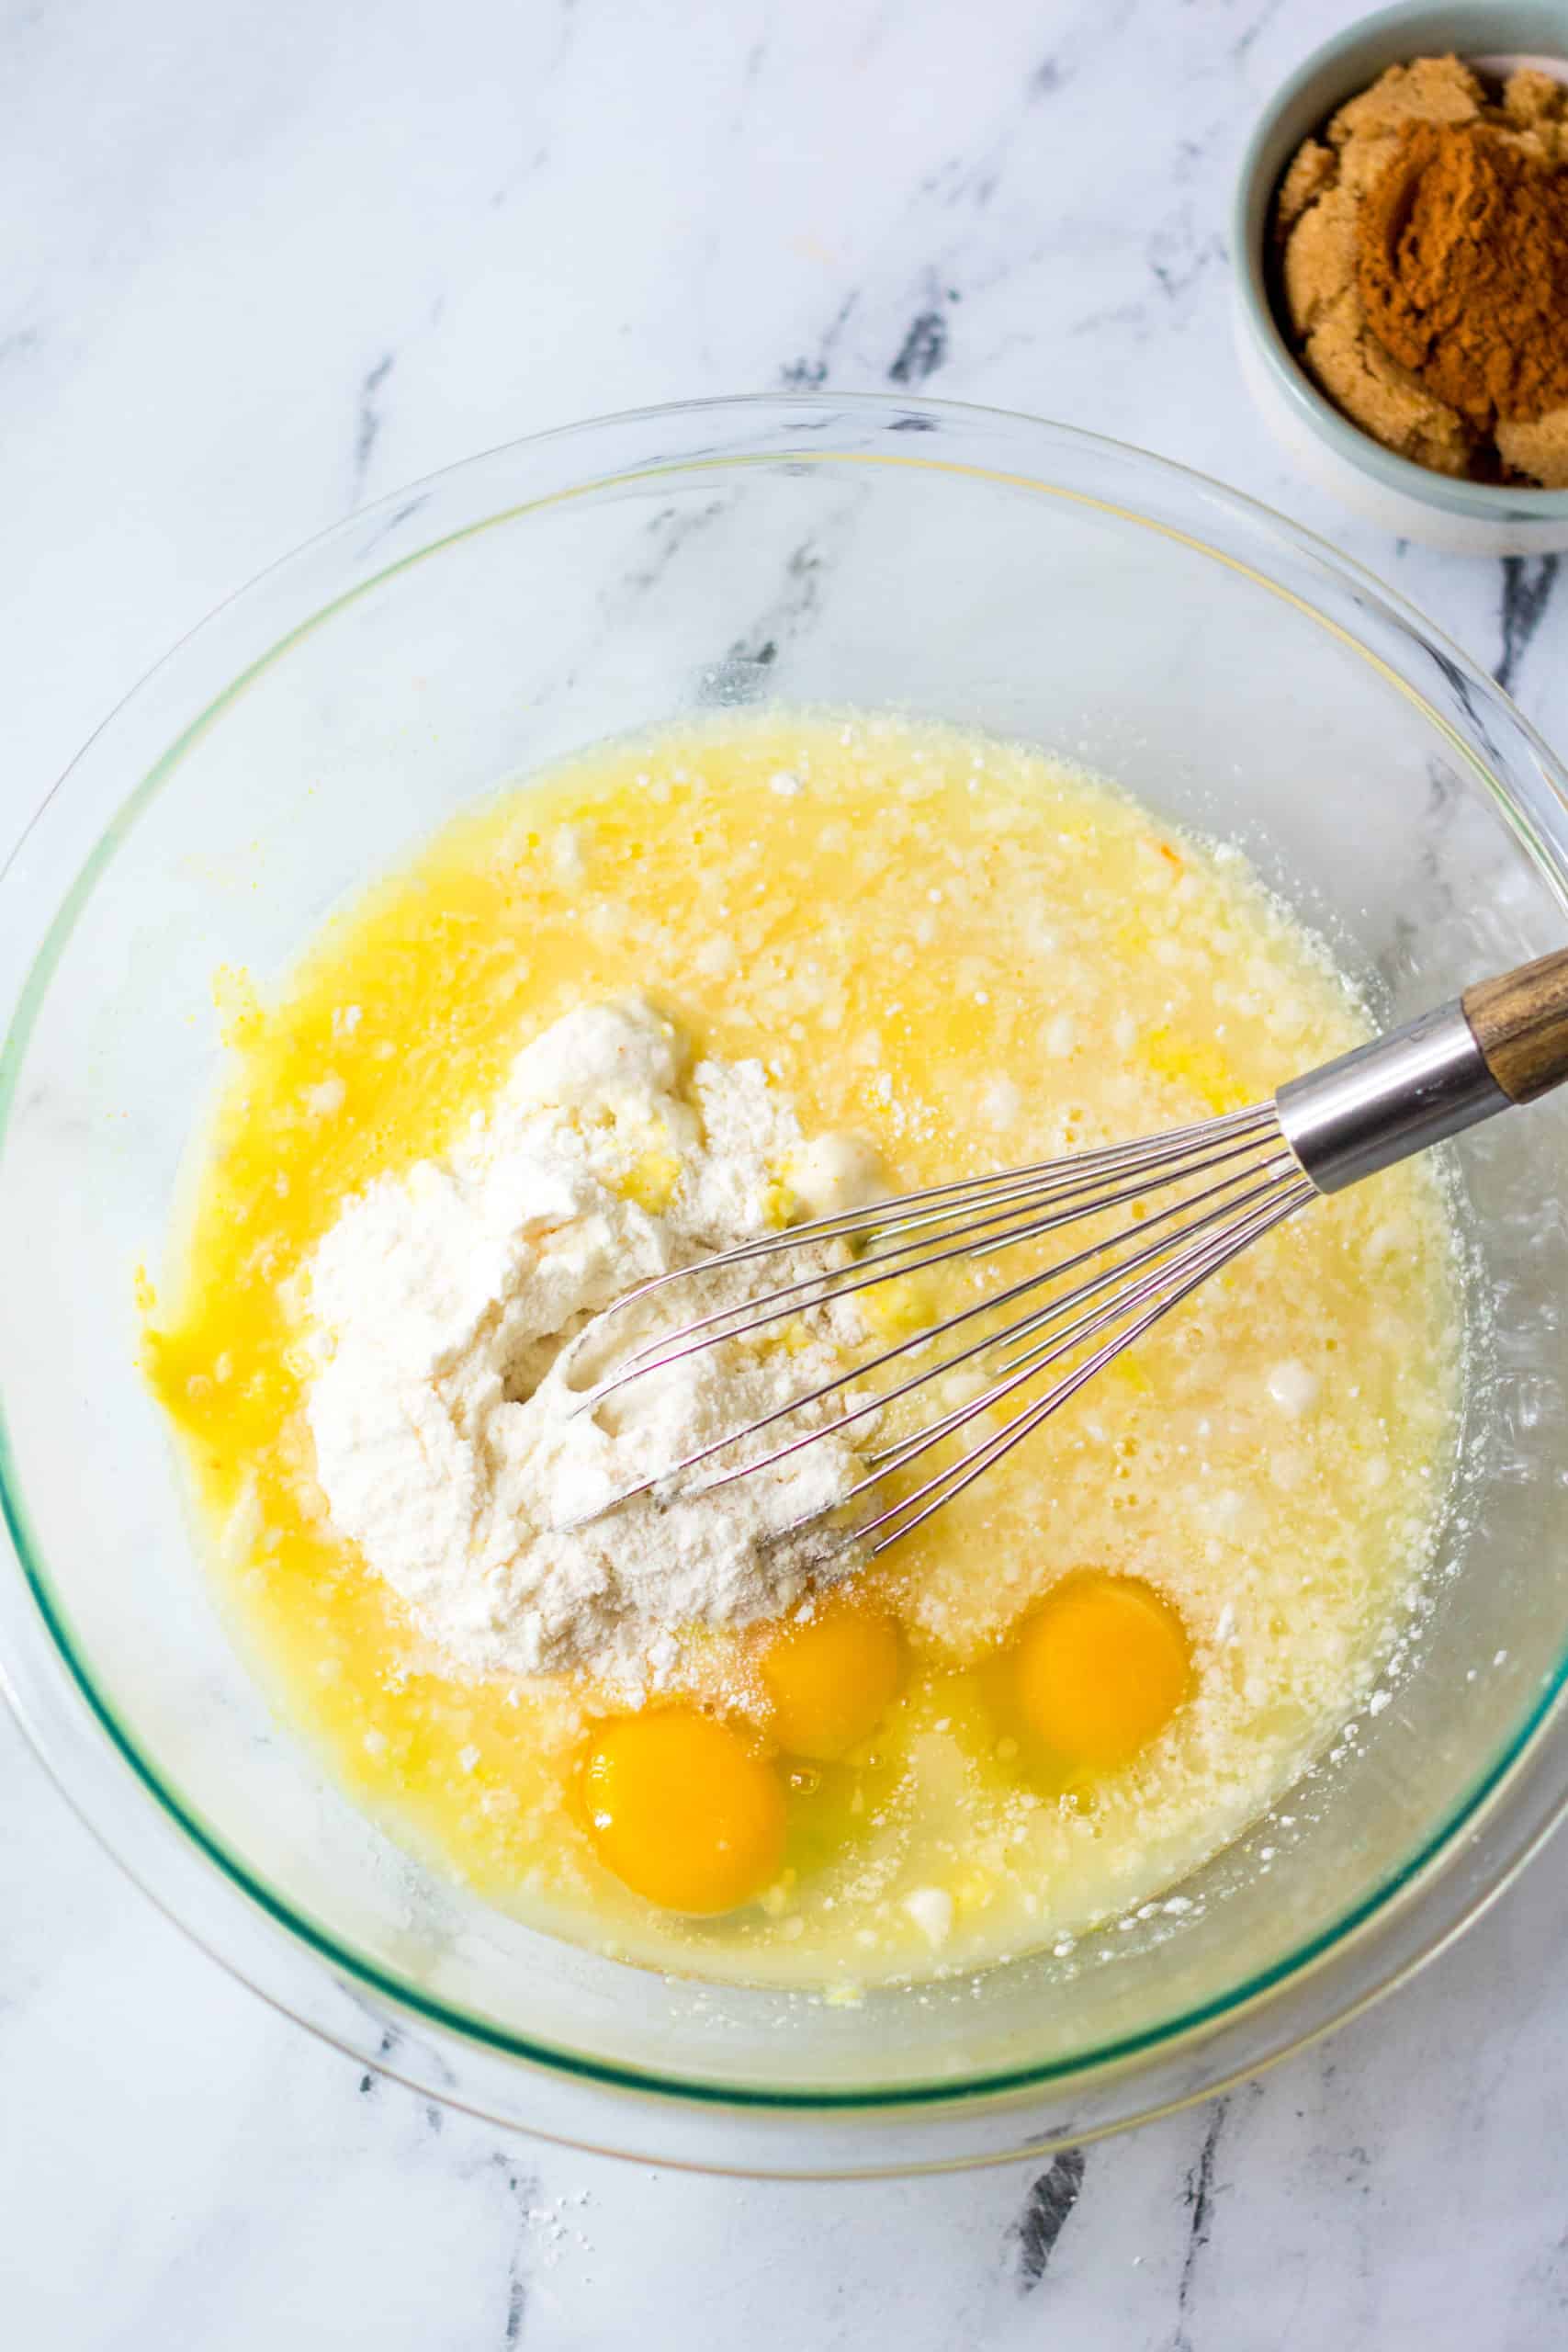 cake mix, eggs, oil in water in a mixing bowl with a whisk